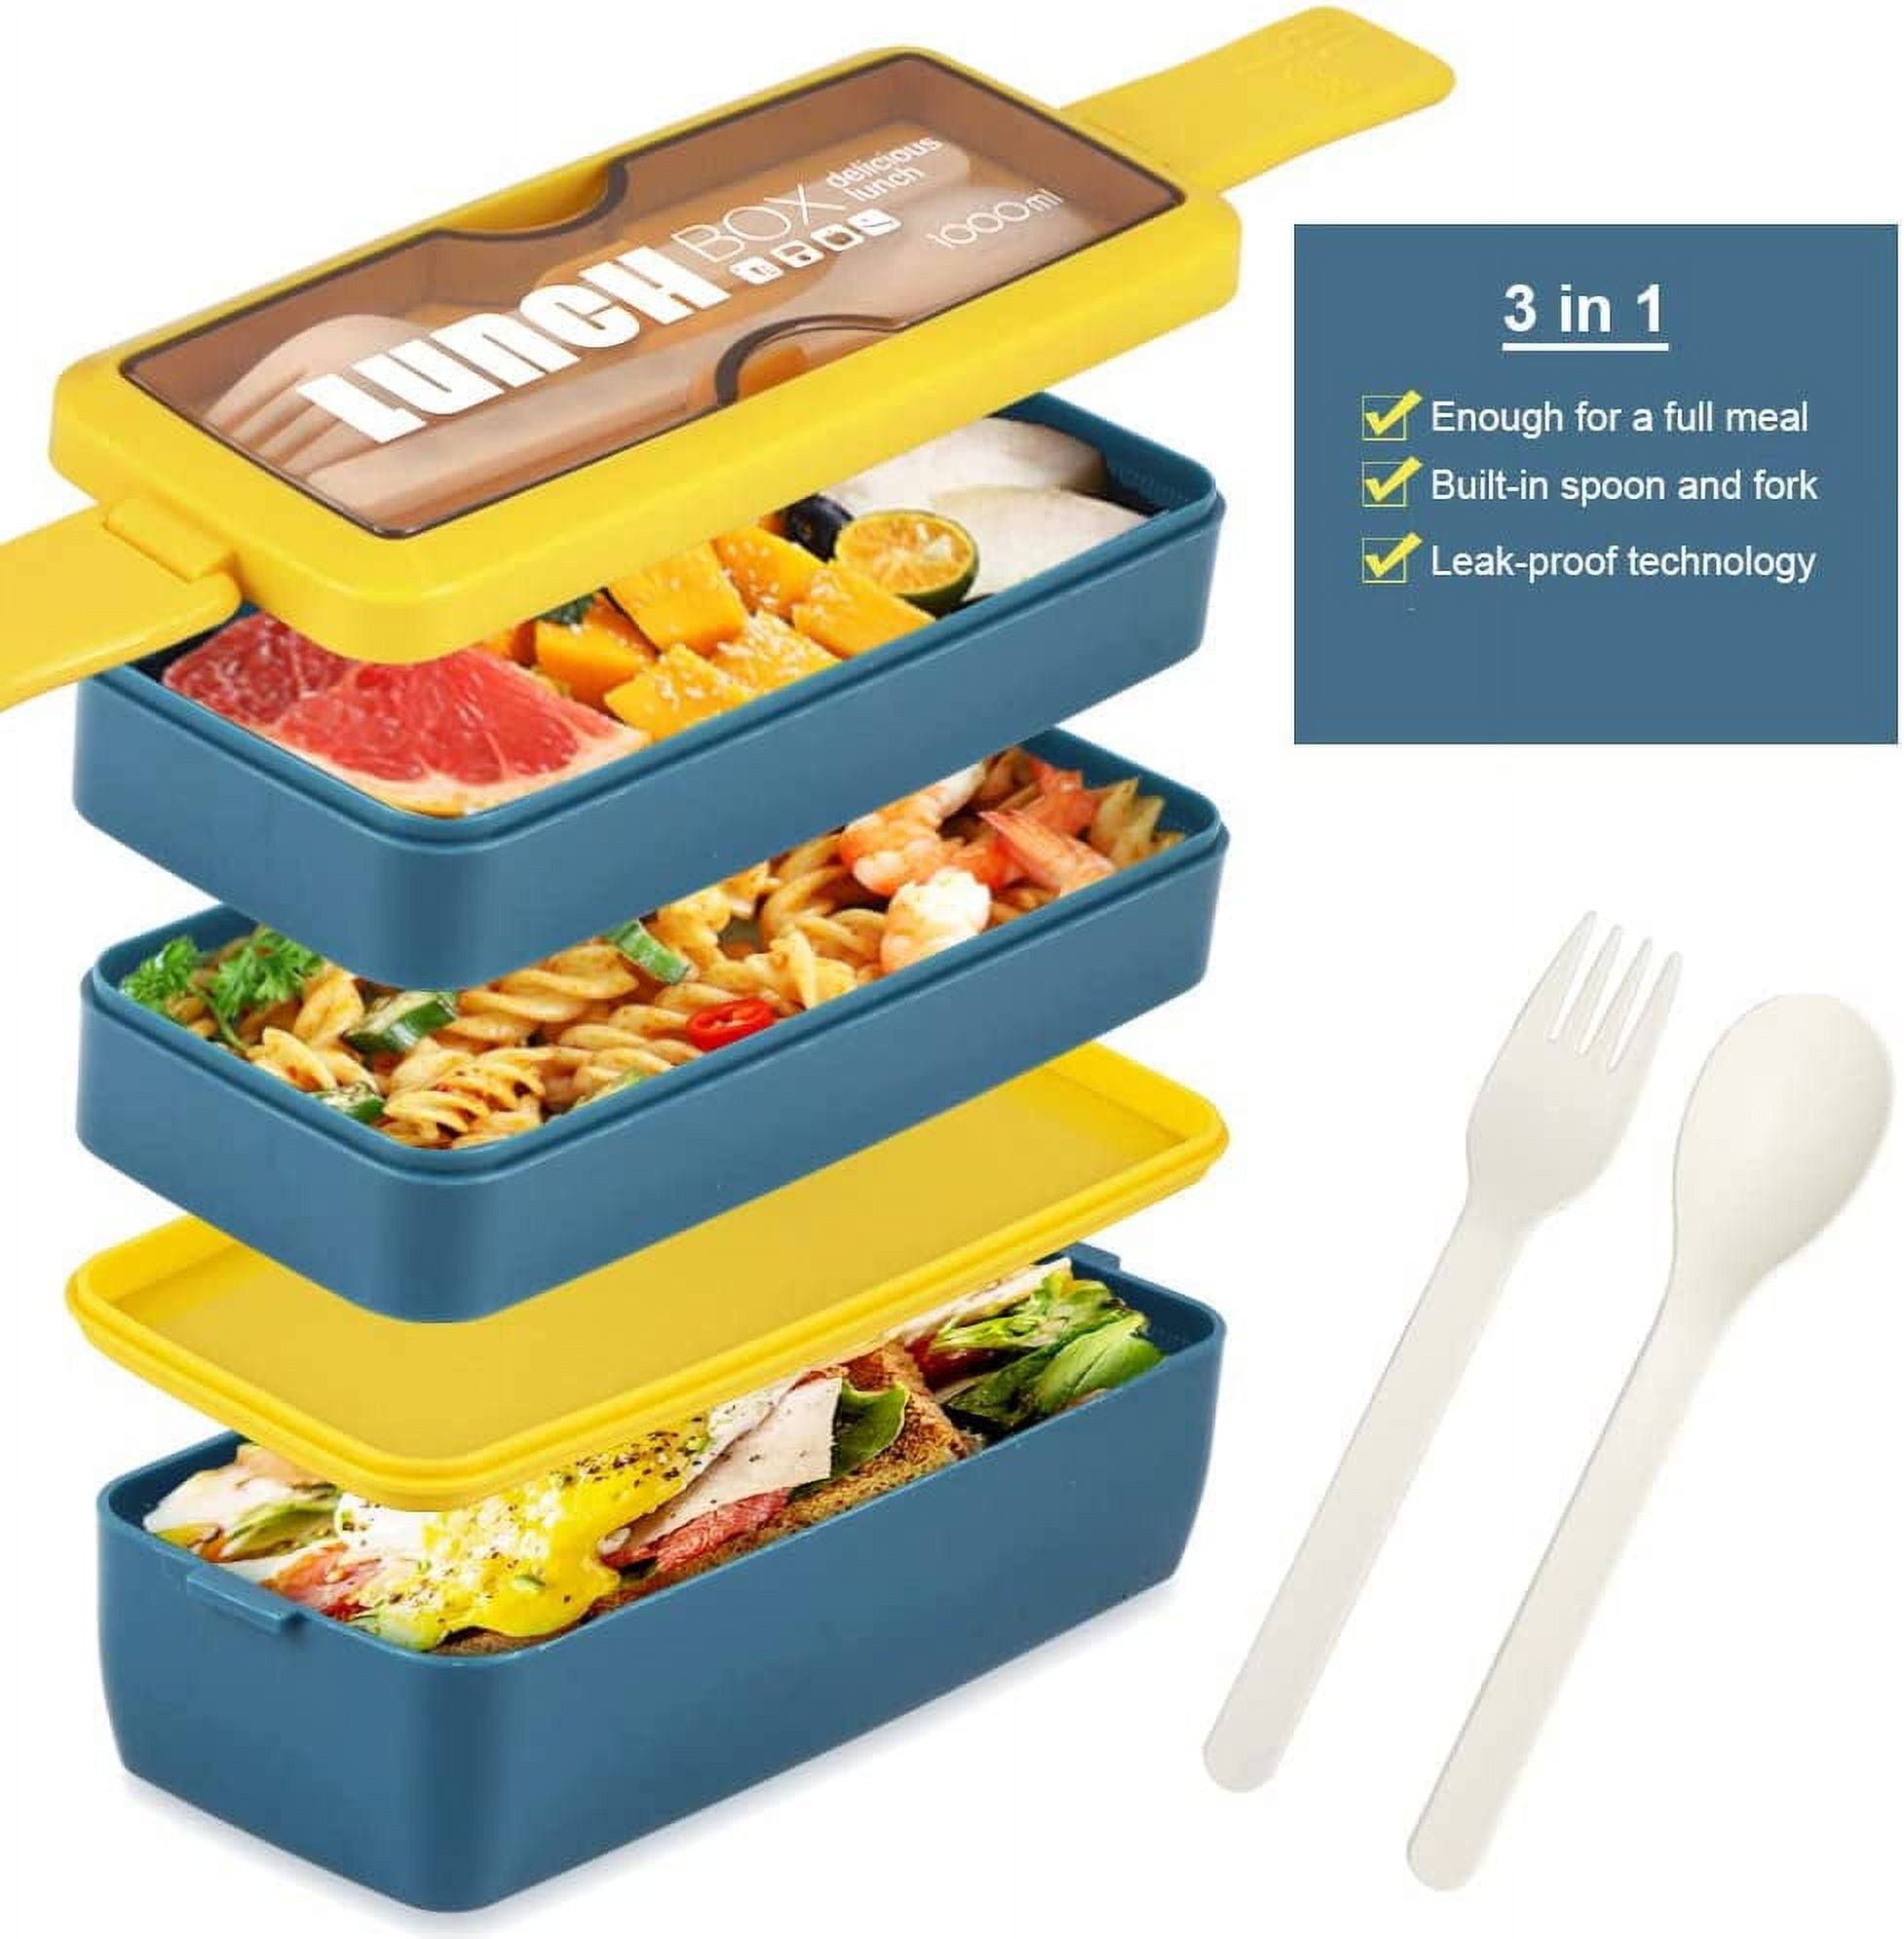  Rarapop Stackable Bento Lunch Box Kit, 3-In-1 Compartment Wheat  Straw Lunch Containers with Tableware, Reusable On-the-Go Meal and Snack  Containers(Morandi Green): Home & Kitchen